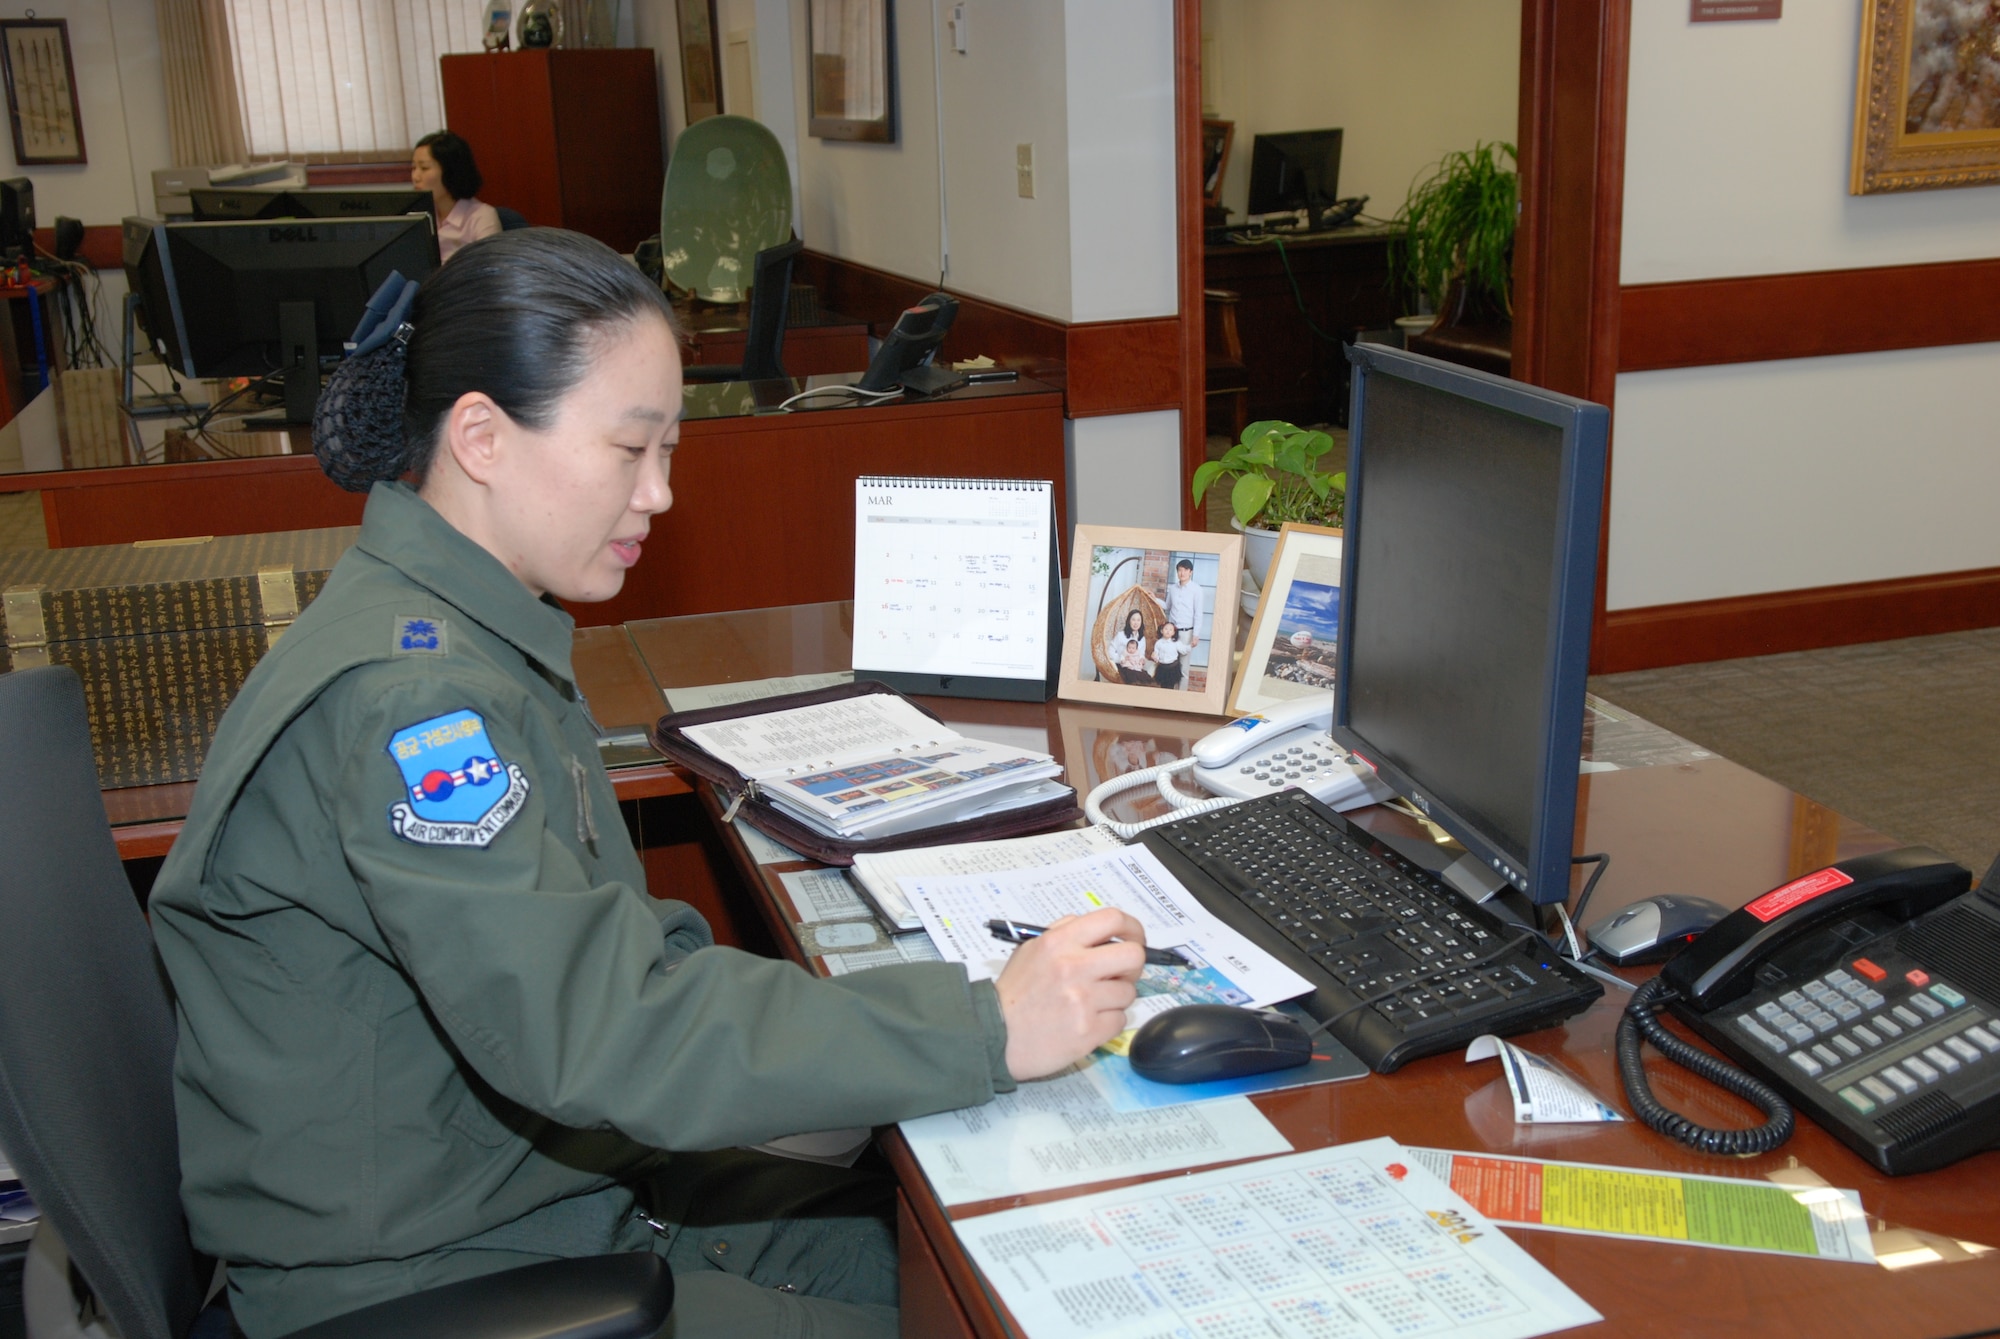 OSAN AIR BASE, Republic of Korea - Republic of Korea Air Force Maj. Lim, Su-Young, ROKAF aide to the U.S. 7th Air Force commander, was one of the first 18 female graduates of the ROK Air Force Academy in 2001 as well as one of their first female pilots. She spent nine years flying the O-2 and the KA-1 attack aircraft before coming to Osan to work on Lt. Gen. Jan-Marc Jouas's staff. (U.S. Air Force photo by Tech. Sgt. Thomas J. Doscher)